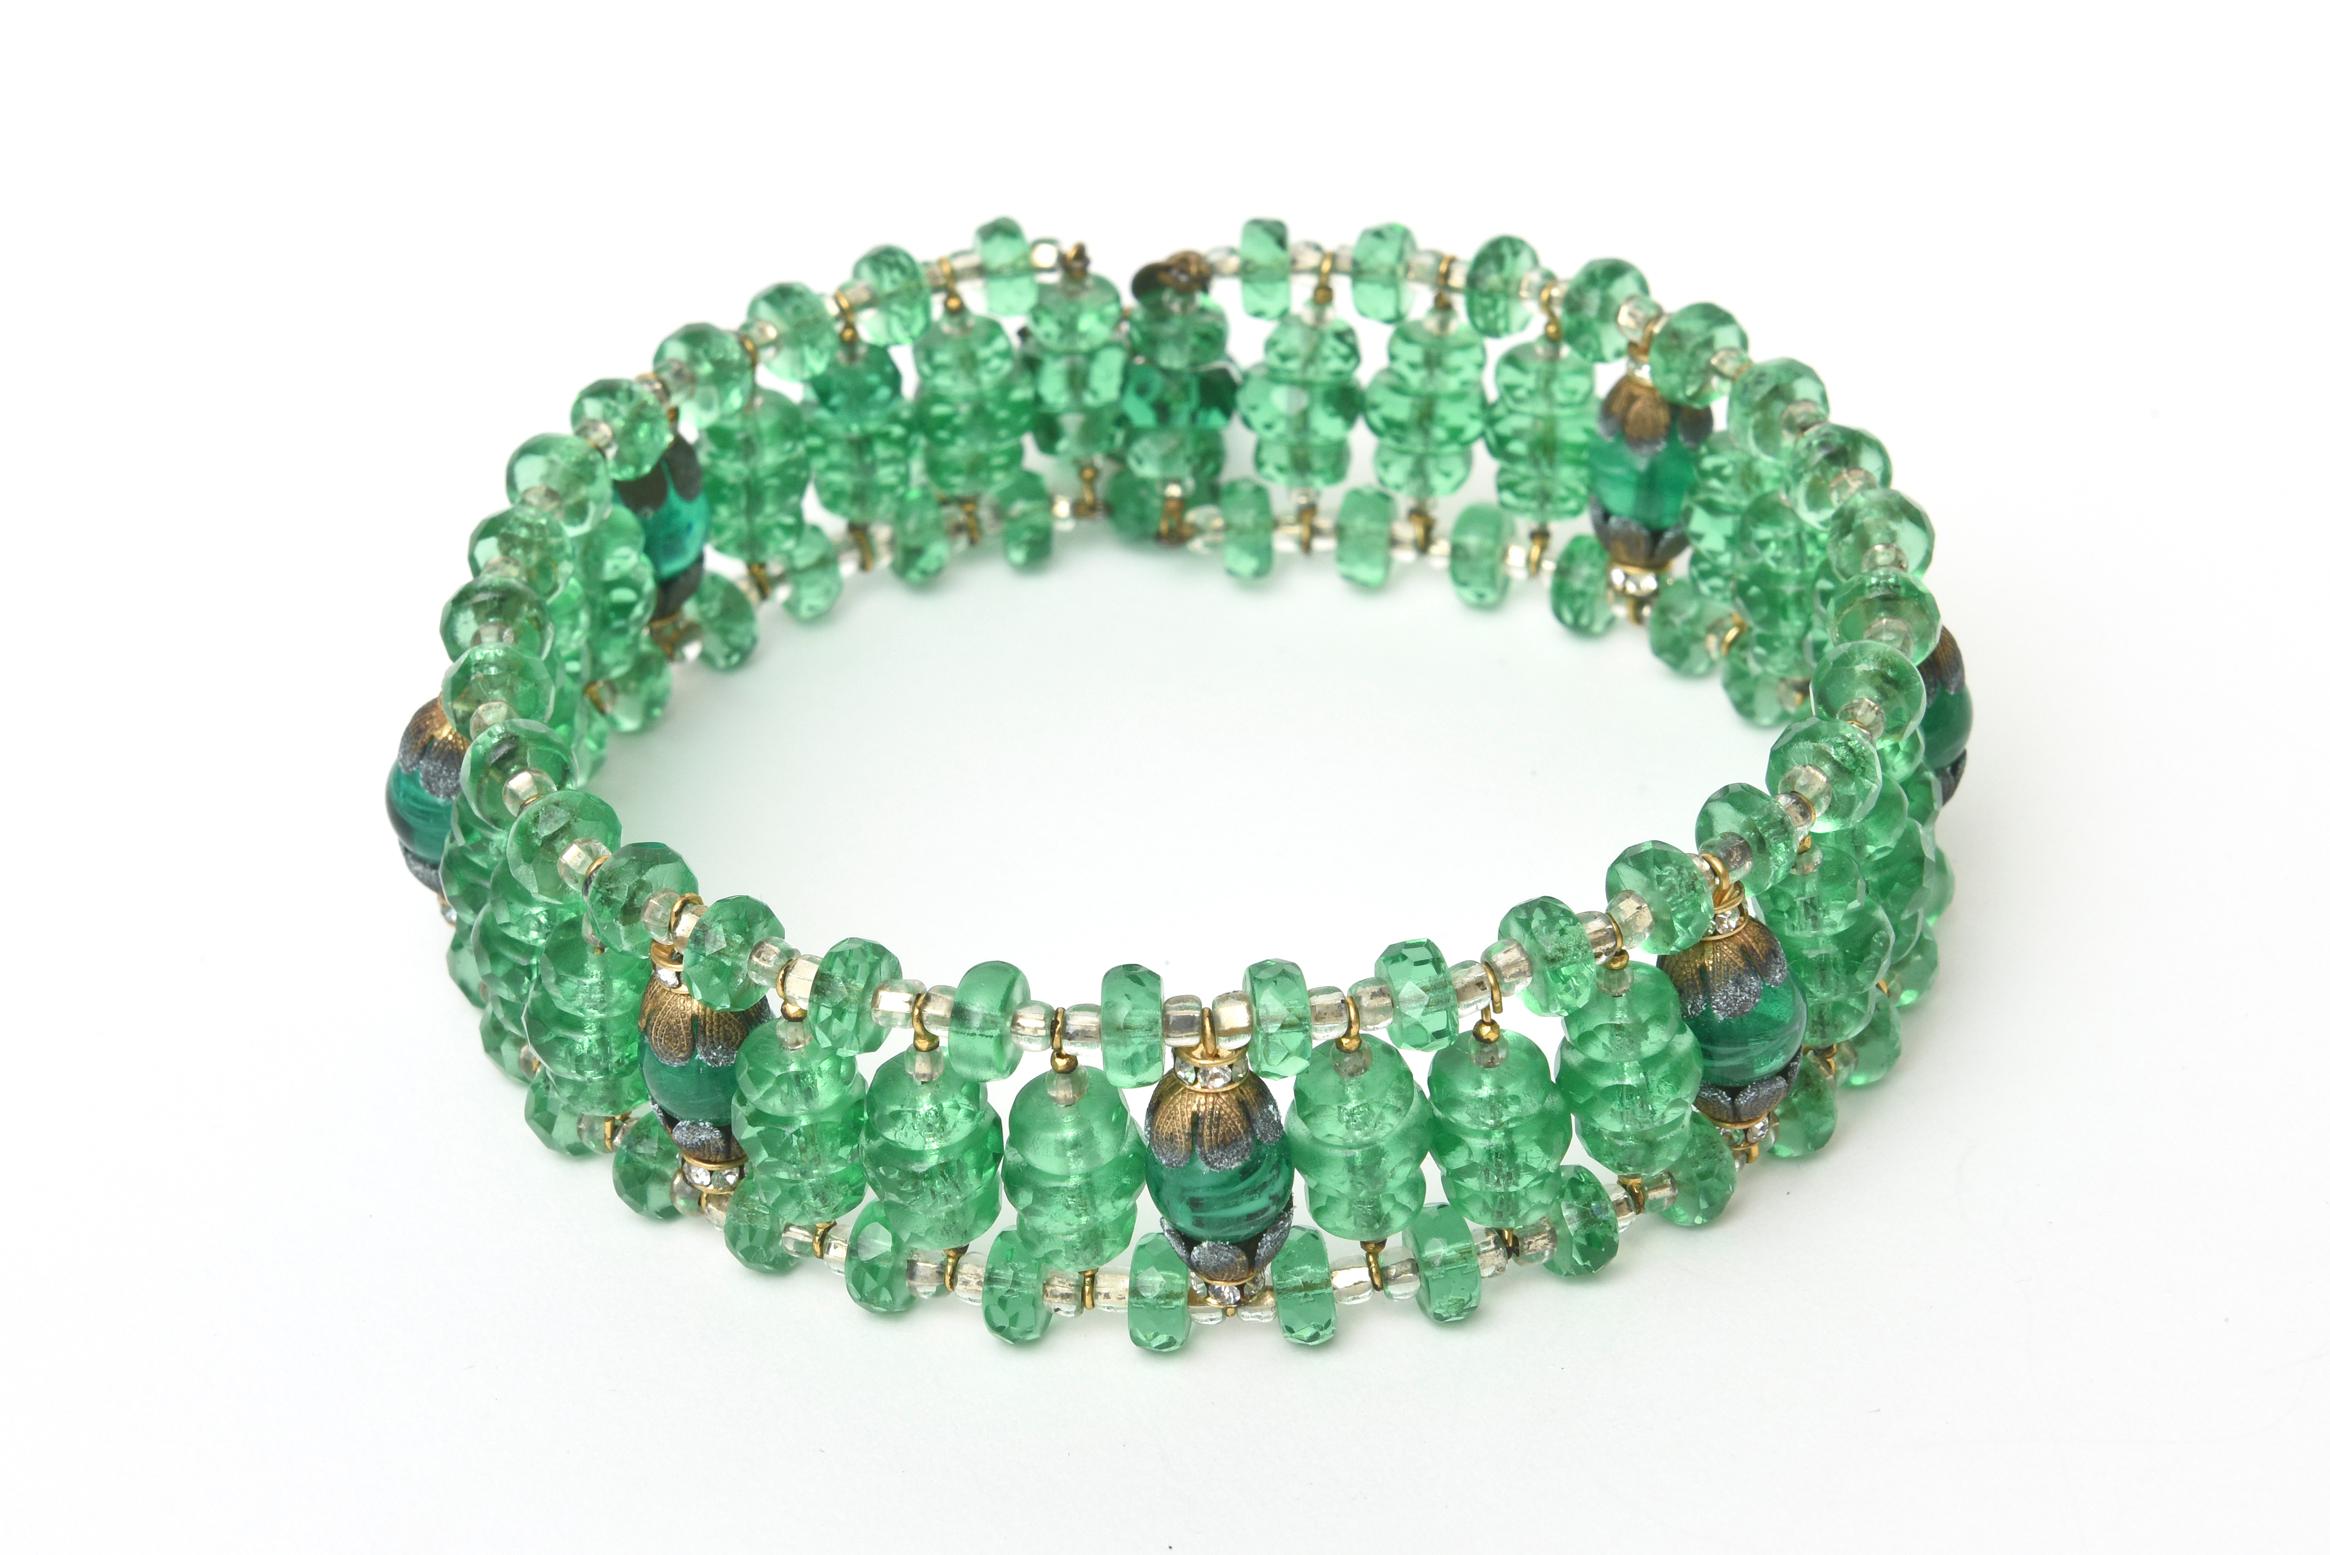 This stunning and amazing set of 2 signed Miriam Haskell mid century modern green glass beaded choler necklace and matching cluster dangle earrings is a gorgeous shade of rich emerald green jewel tone. They can be worn together or separately. Both